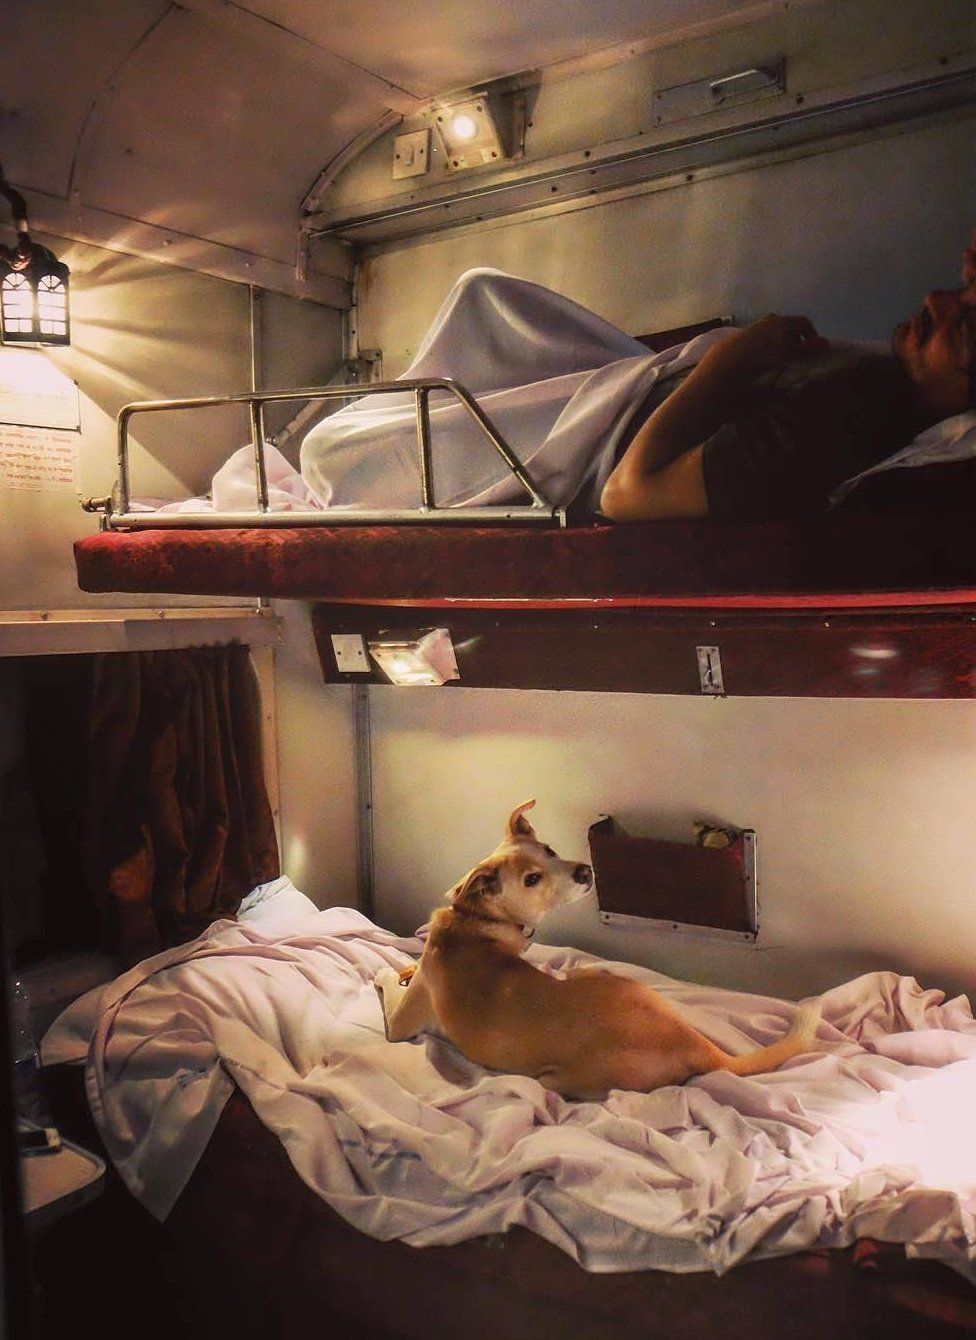 A dog sits on the lower berth inside an air conditioned car in the train.